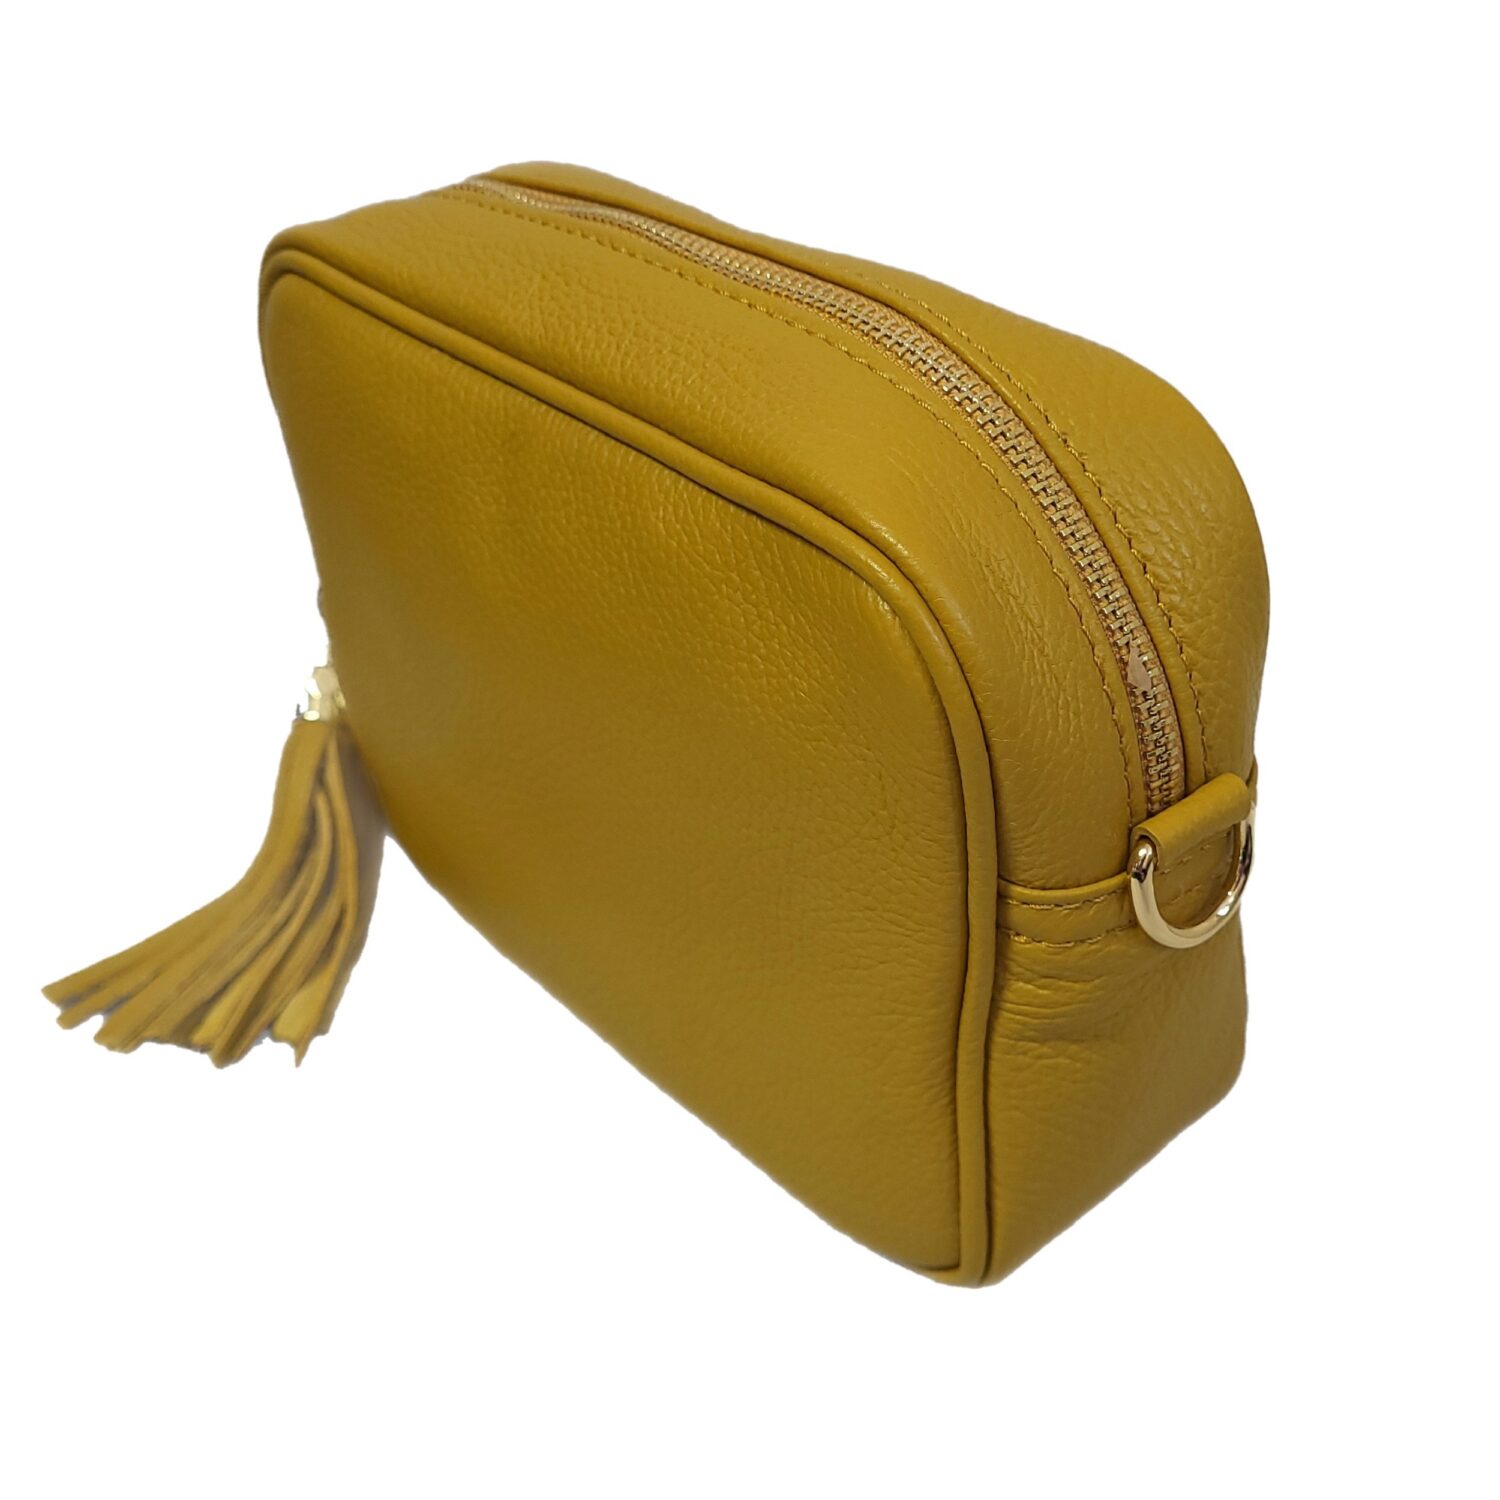 yellow rectangular bag with tassle showing zip and size view